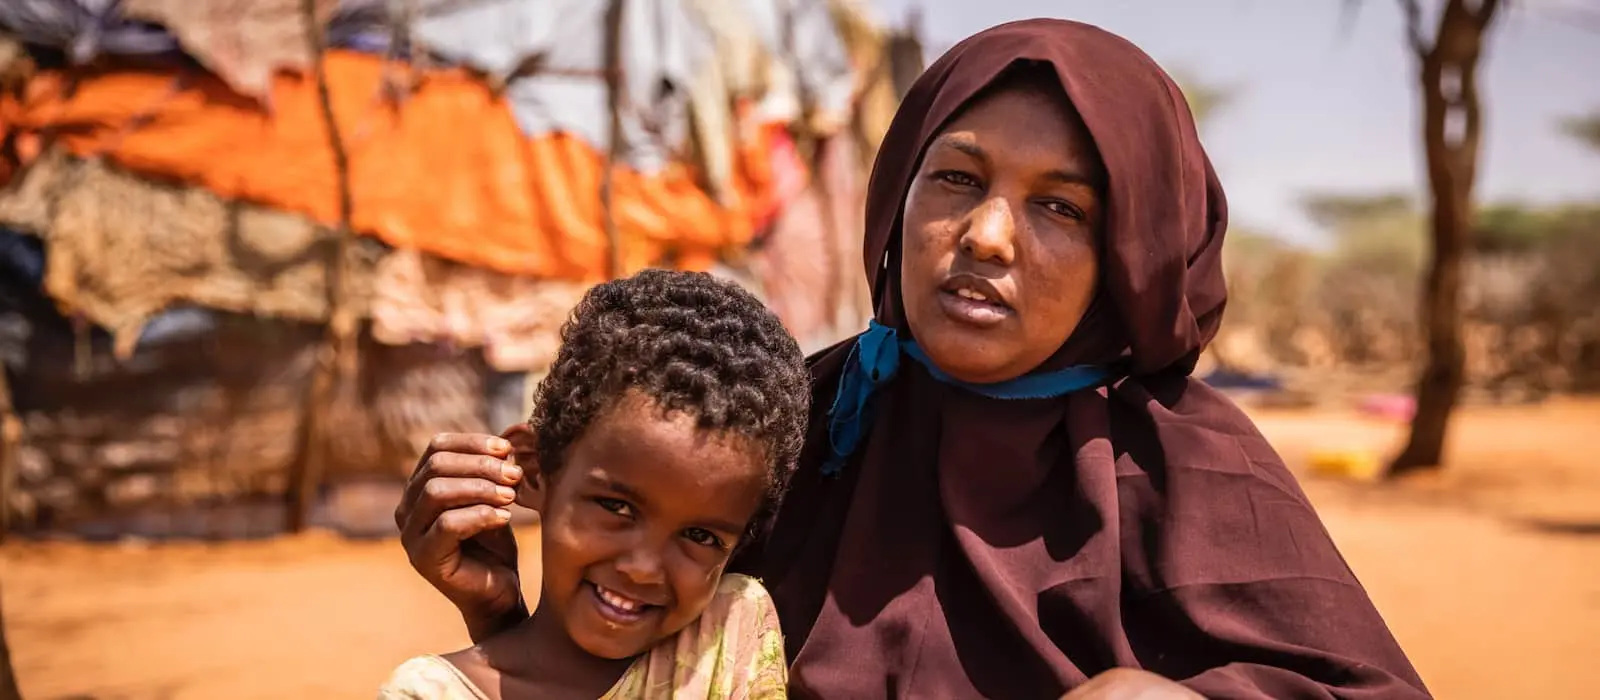 Woman with her young daughter in Gocondhaale, Tagdheer, Somaliland.